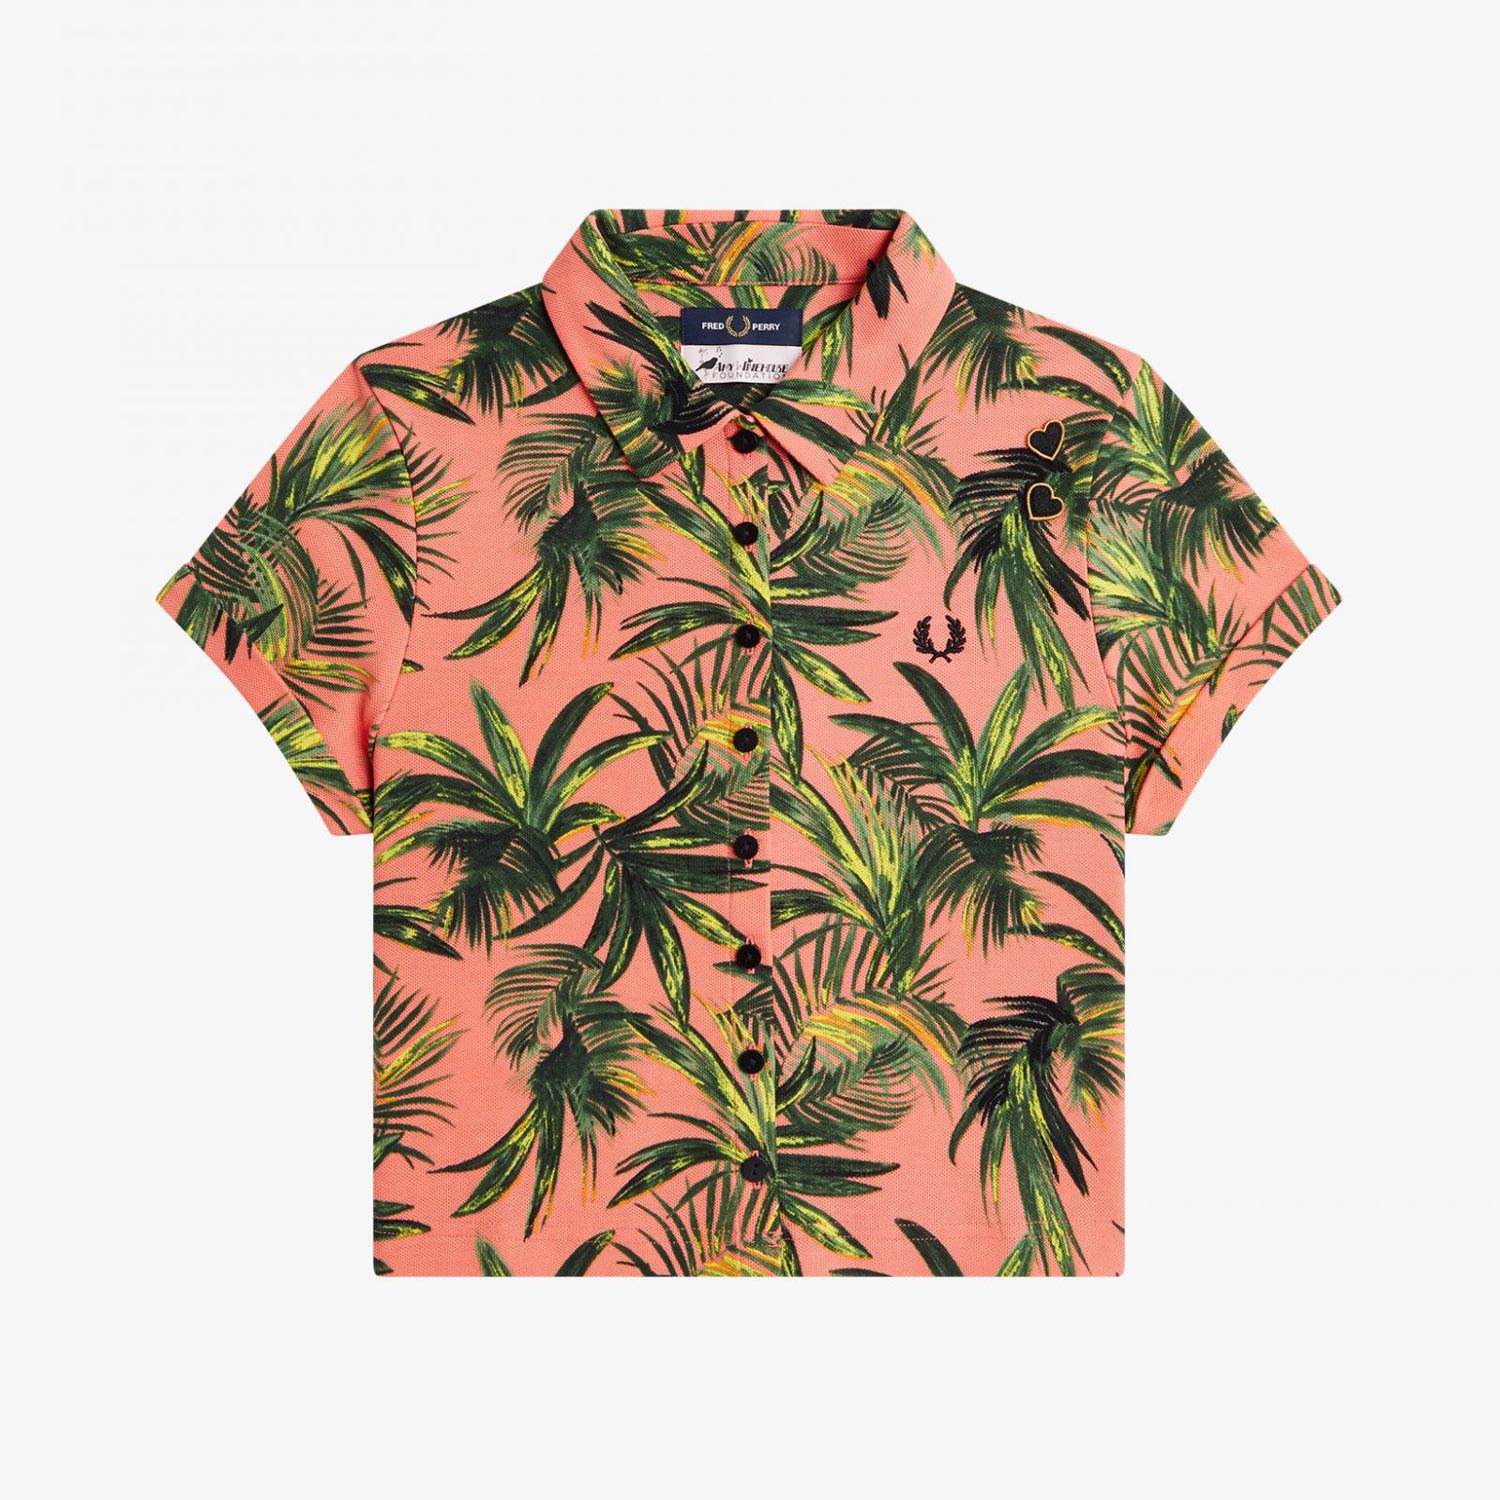 Fred Perry Women's X Amy Winehouse Palm Print Pique Polo - Coral Heat